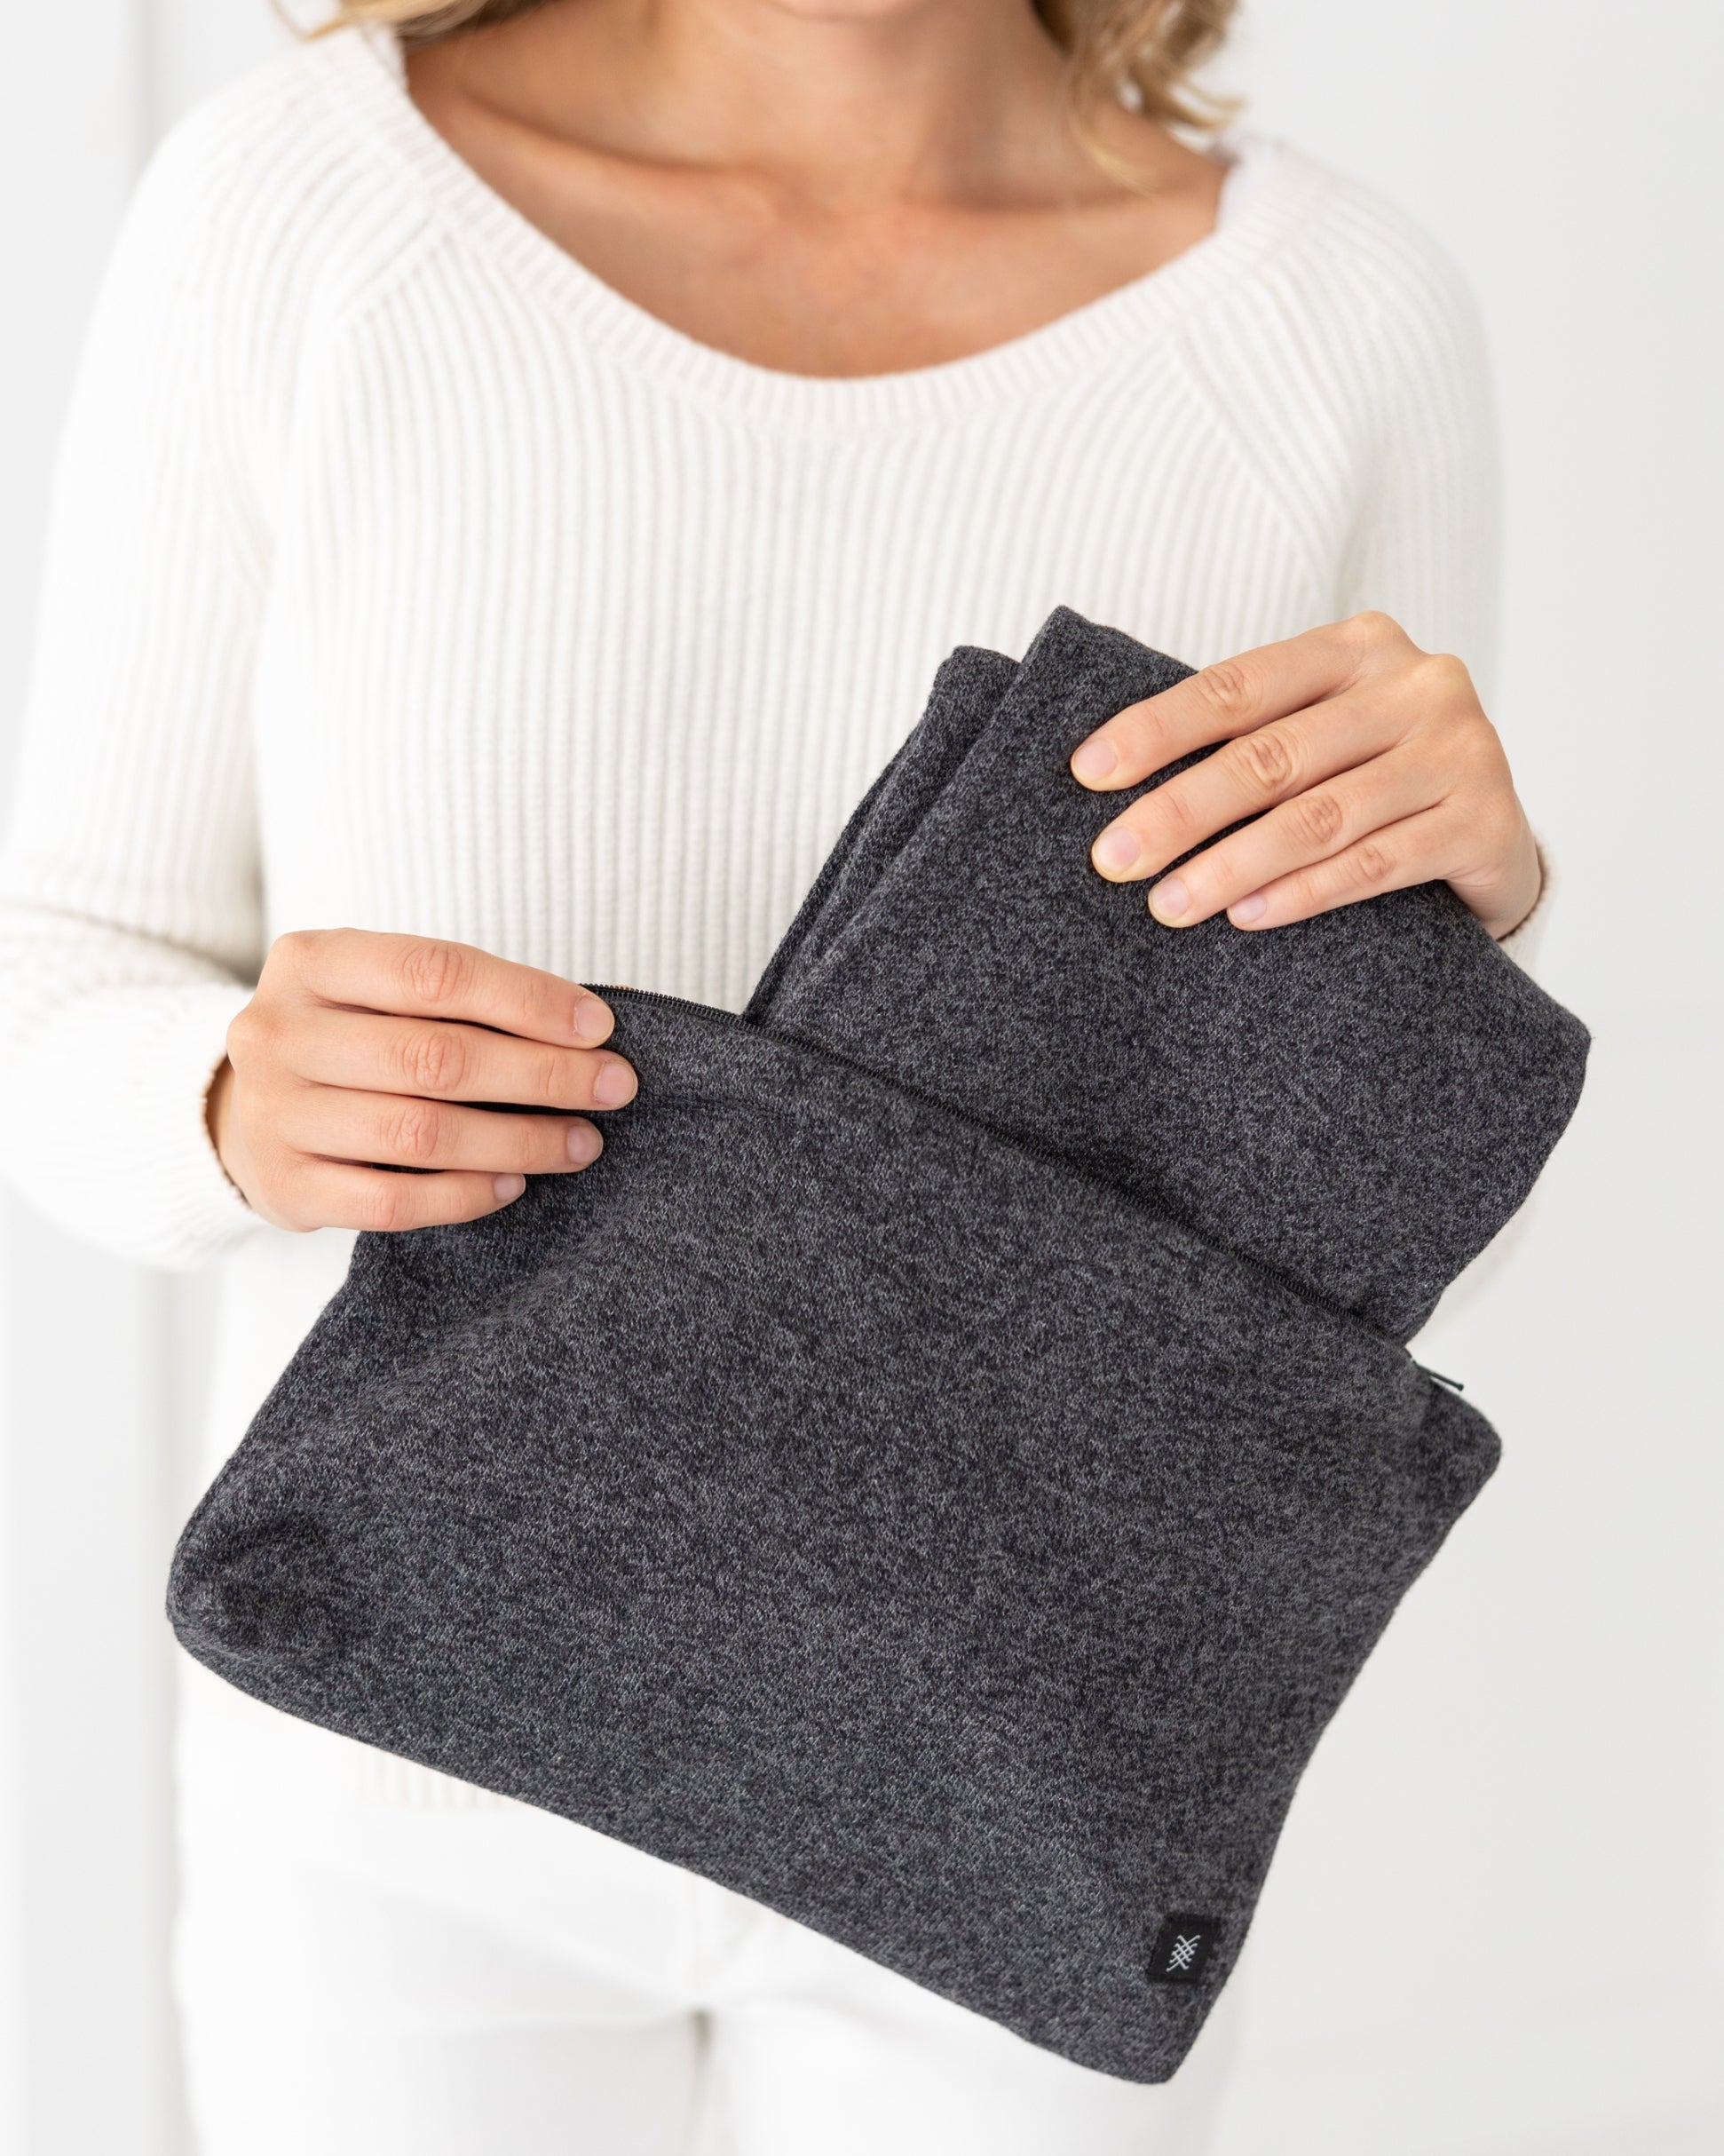 Woman holding Graphite Carry Pouch, which is a Gray zipper pouch that can hold the Dreamsoft Travel Scarf